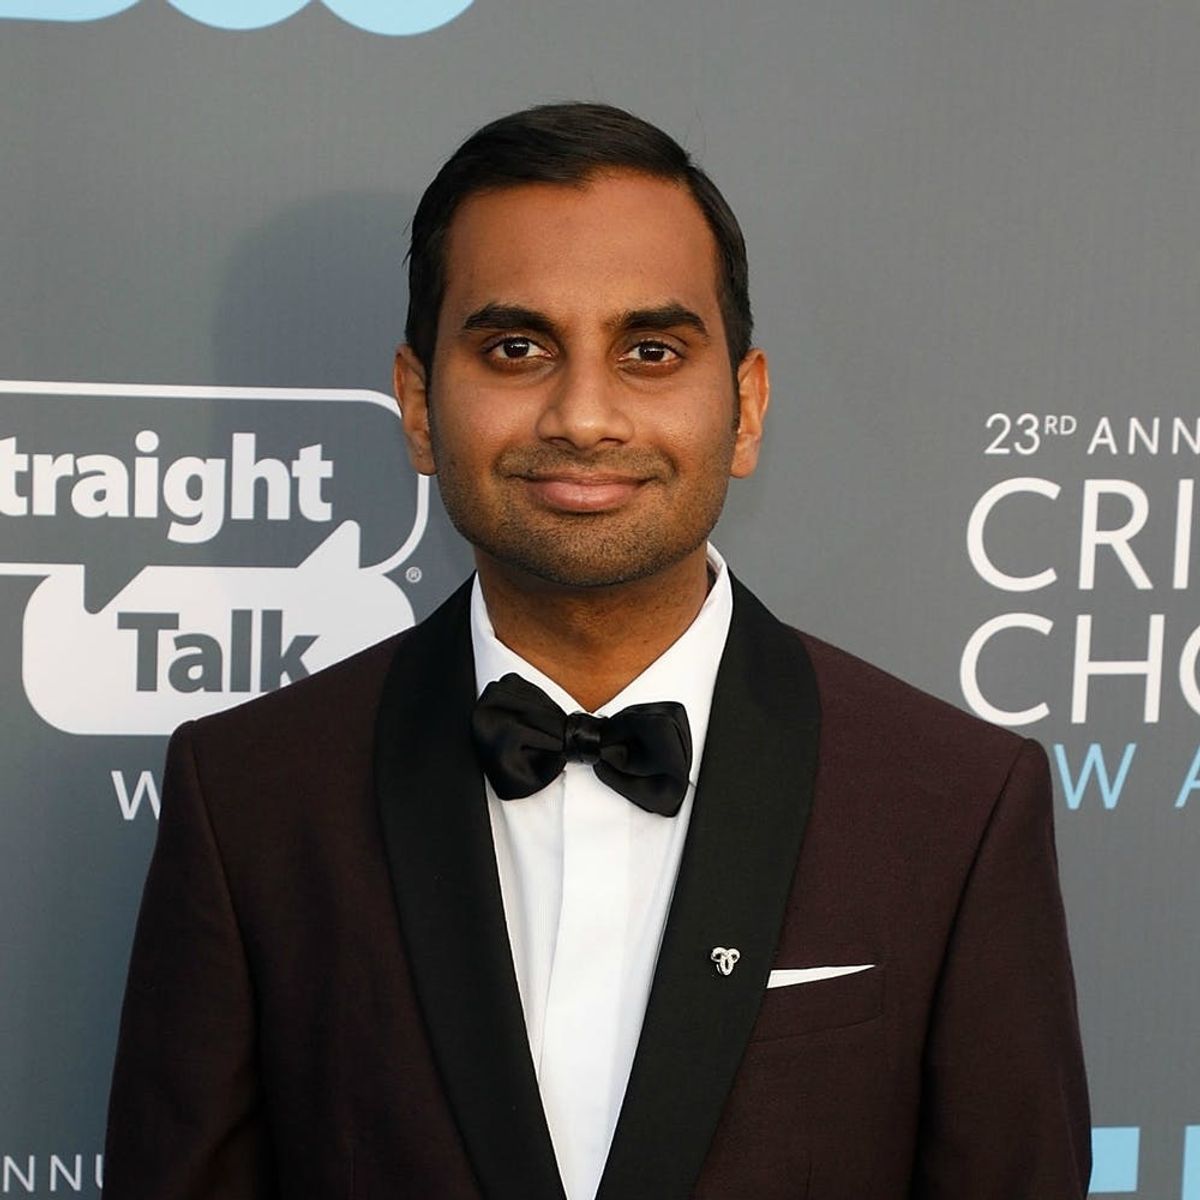 Aziz Ansari Has Responded to Allegations Against Him: “I Took Her Words to Heart”